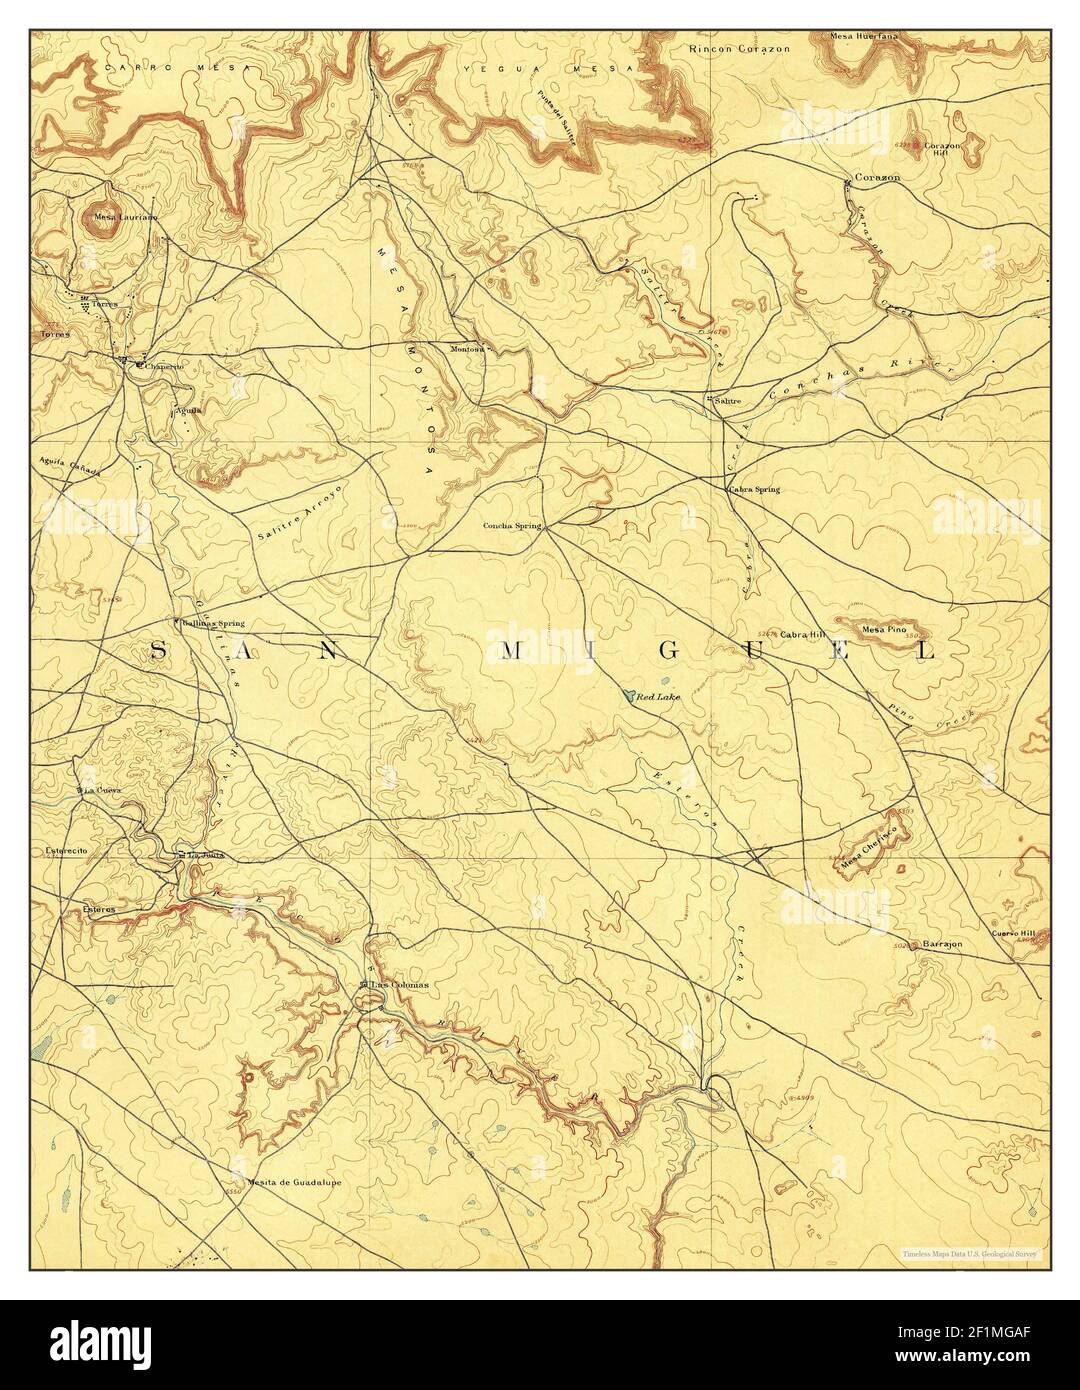 Corazon, New Mexico, map 1894, 1:125000, United States of America by Timeless Maps, data U.S. Geological Survey Stock Photo